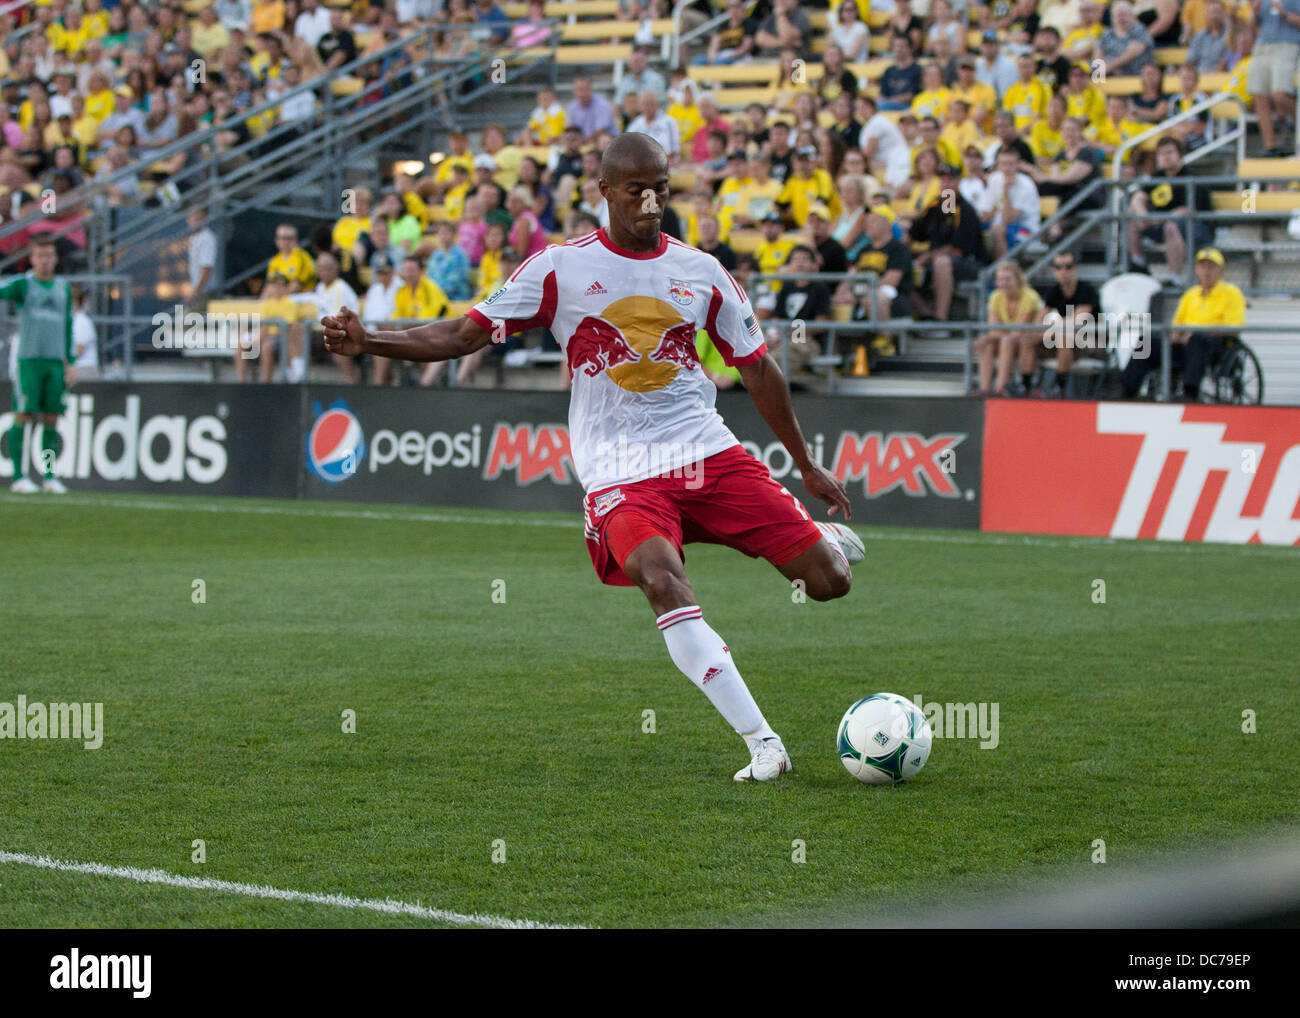 Columbus, OH, USA. 10th Aug, 2013. August 10, 2013: New York Red Bulls defender Roy Miller (7) during the match between the New York Red Bulls and the Columbus Crew at Columbus Crew Stadium in Columbus, OH. The Columbus Crew defeated the New York Red Bulls 2-0. Credit:  csm/Alamy Live News Stock Photo